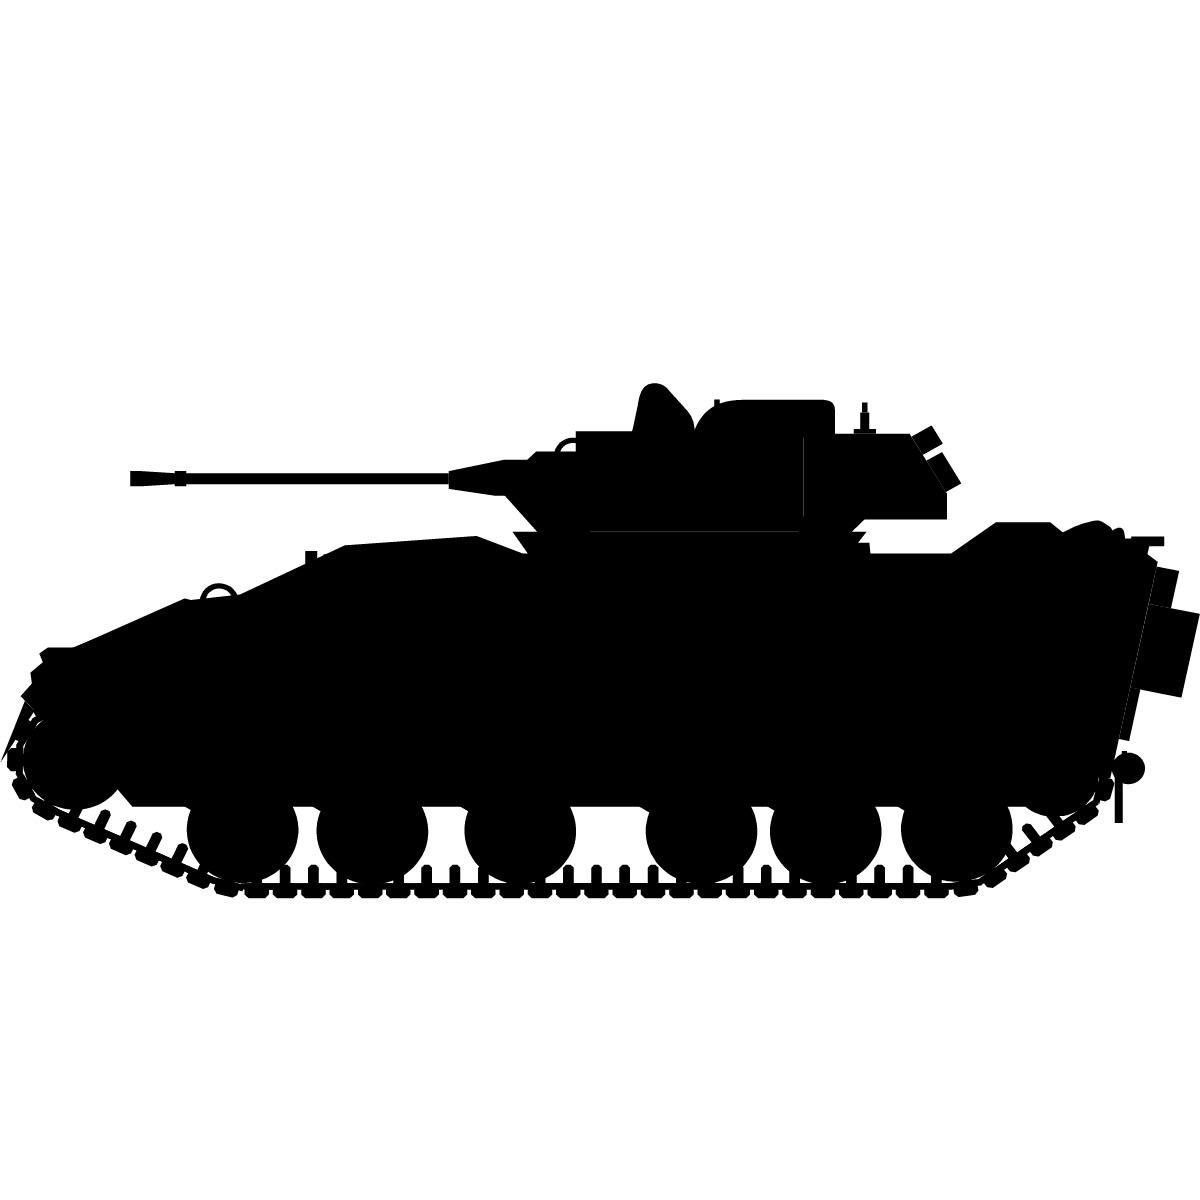 For - Army Tank Silhouette | Clipart Panda - Free Clipart Images